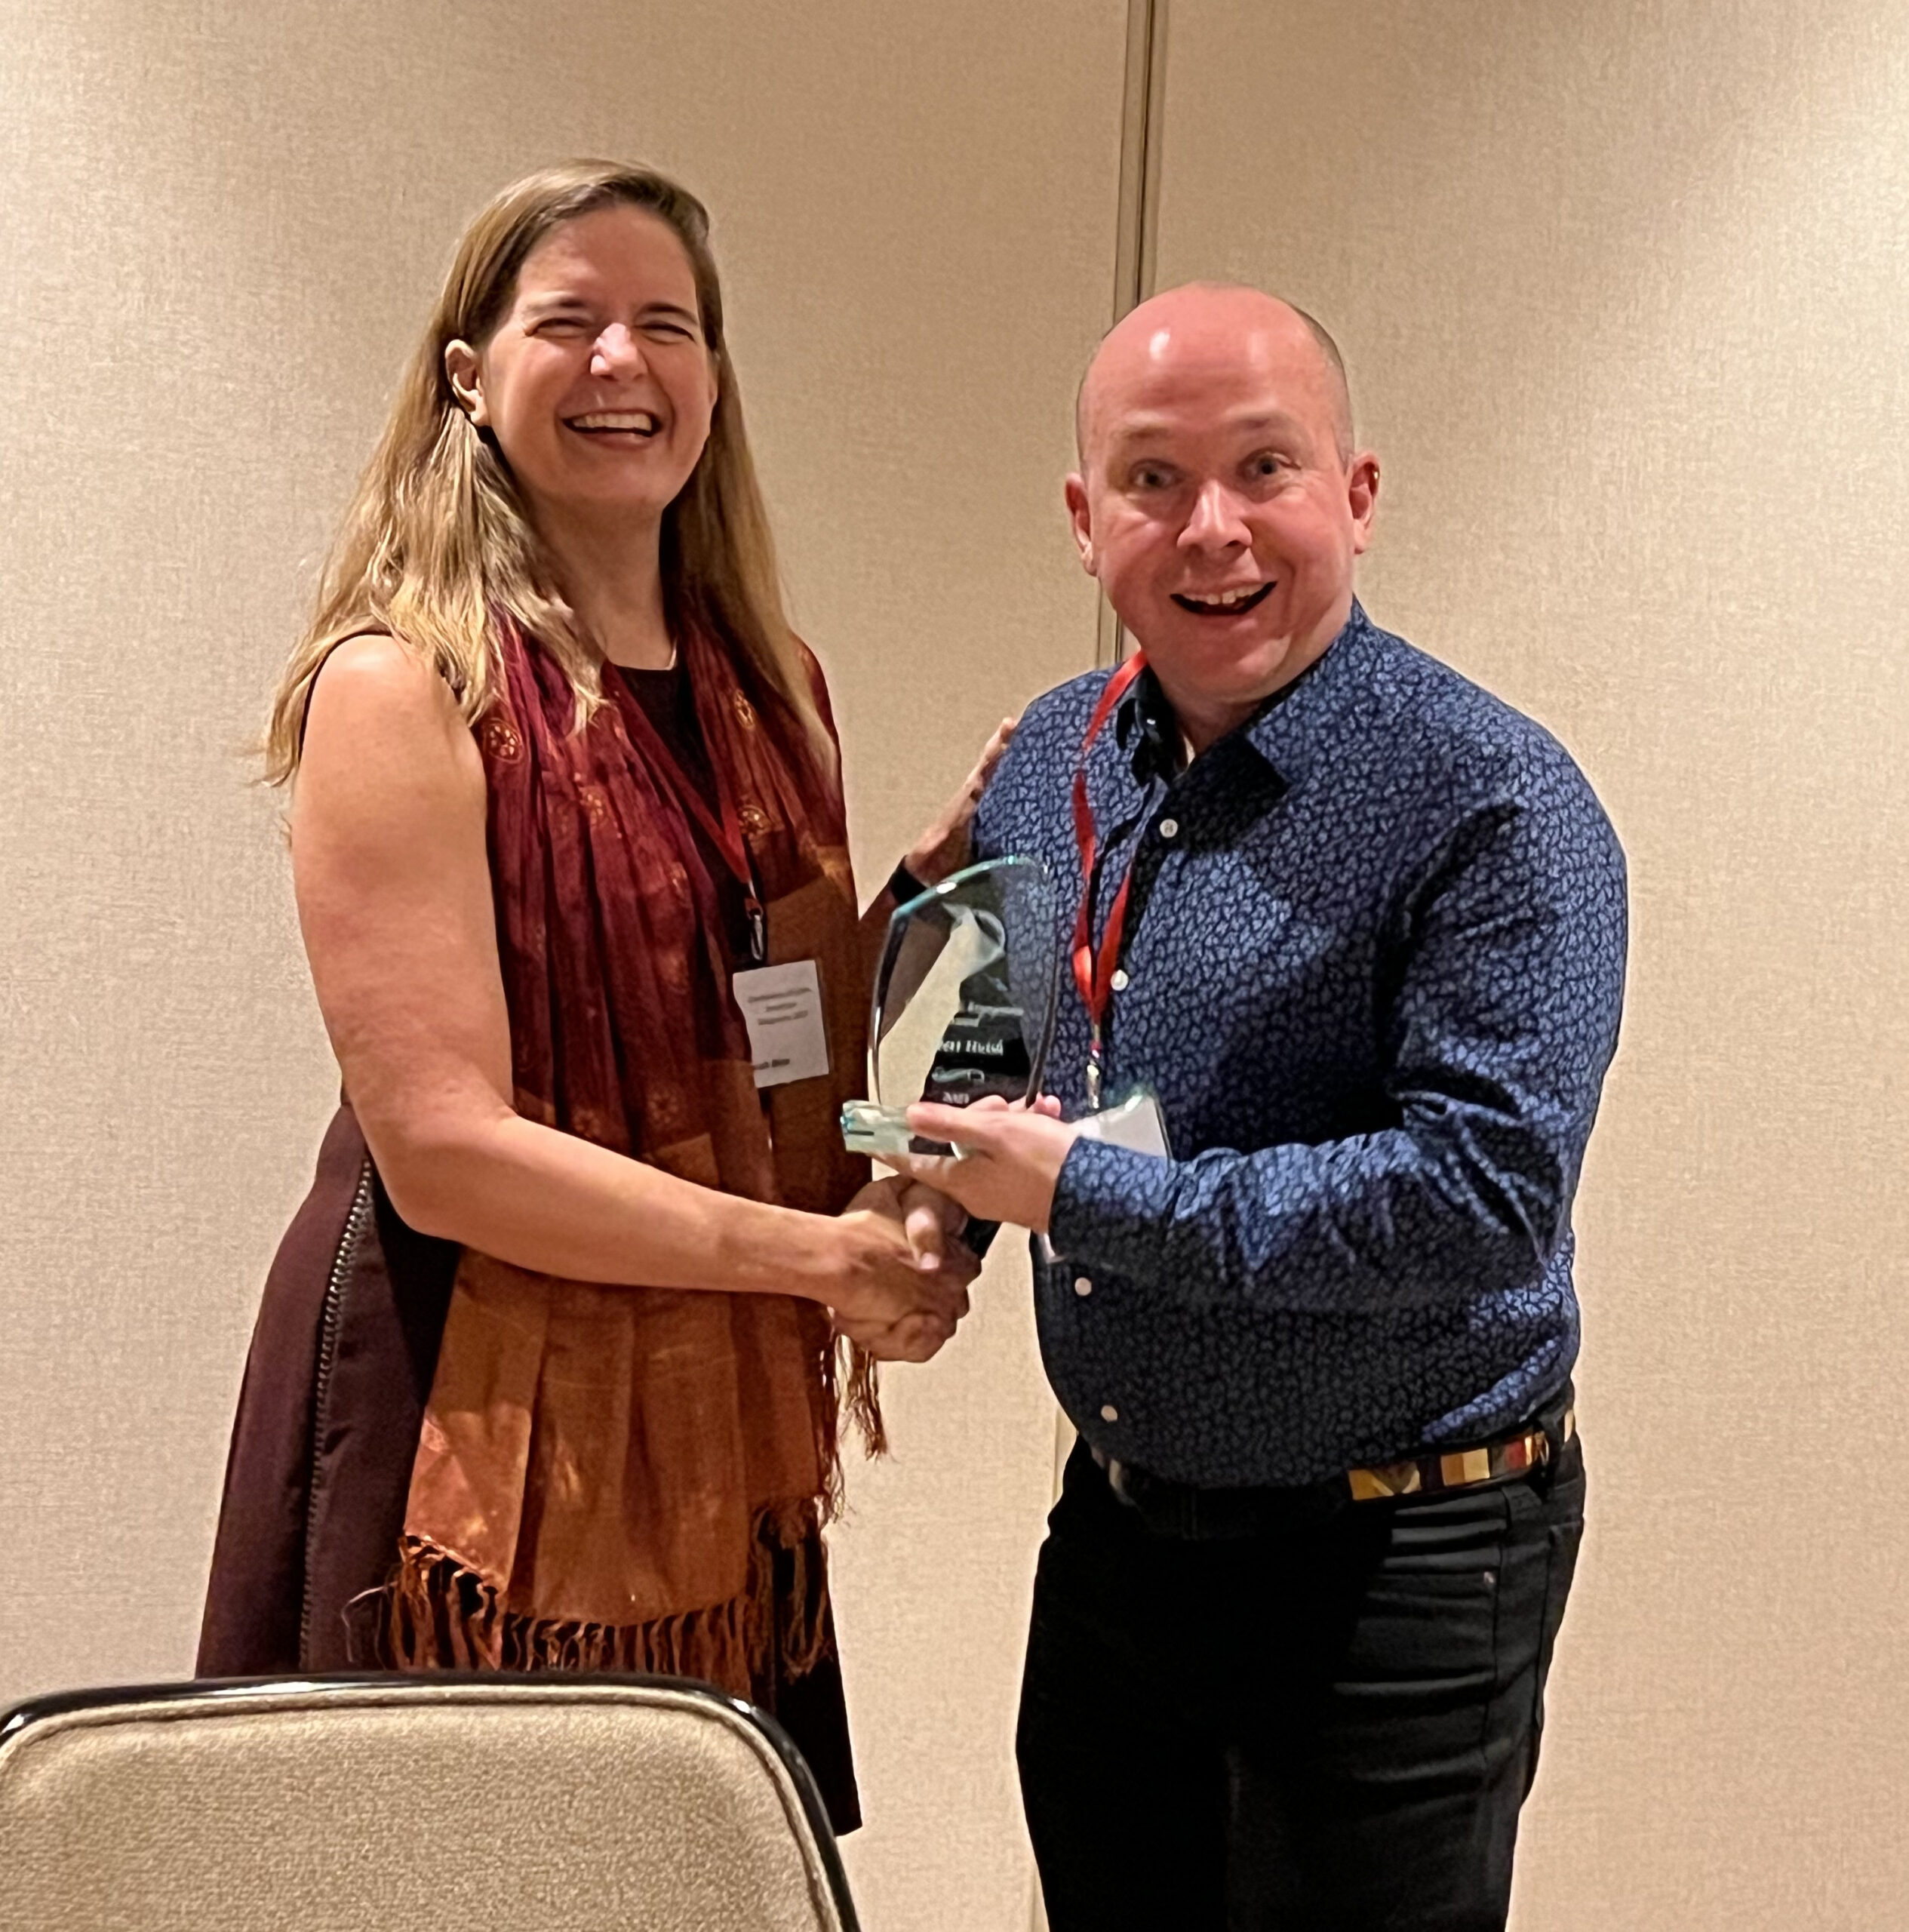 Dr. Robert Huish, Associate Professor of Geography at Ohio University (right) receives the CLAG Teaching Award from CLAG Vice-chair Sarah Blue.